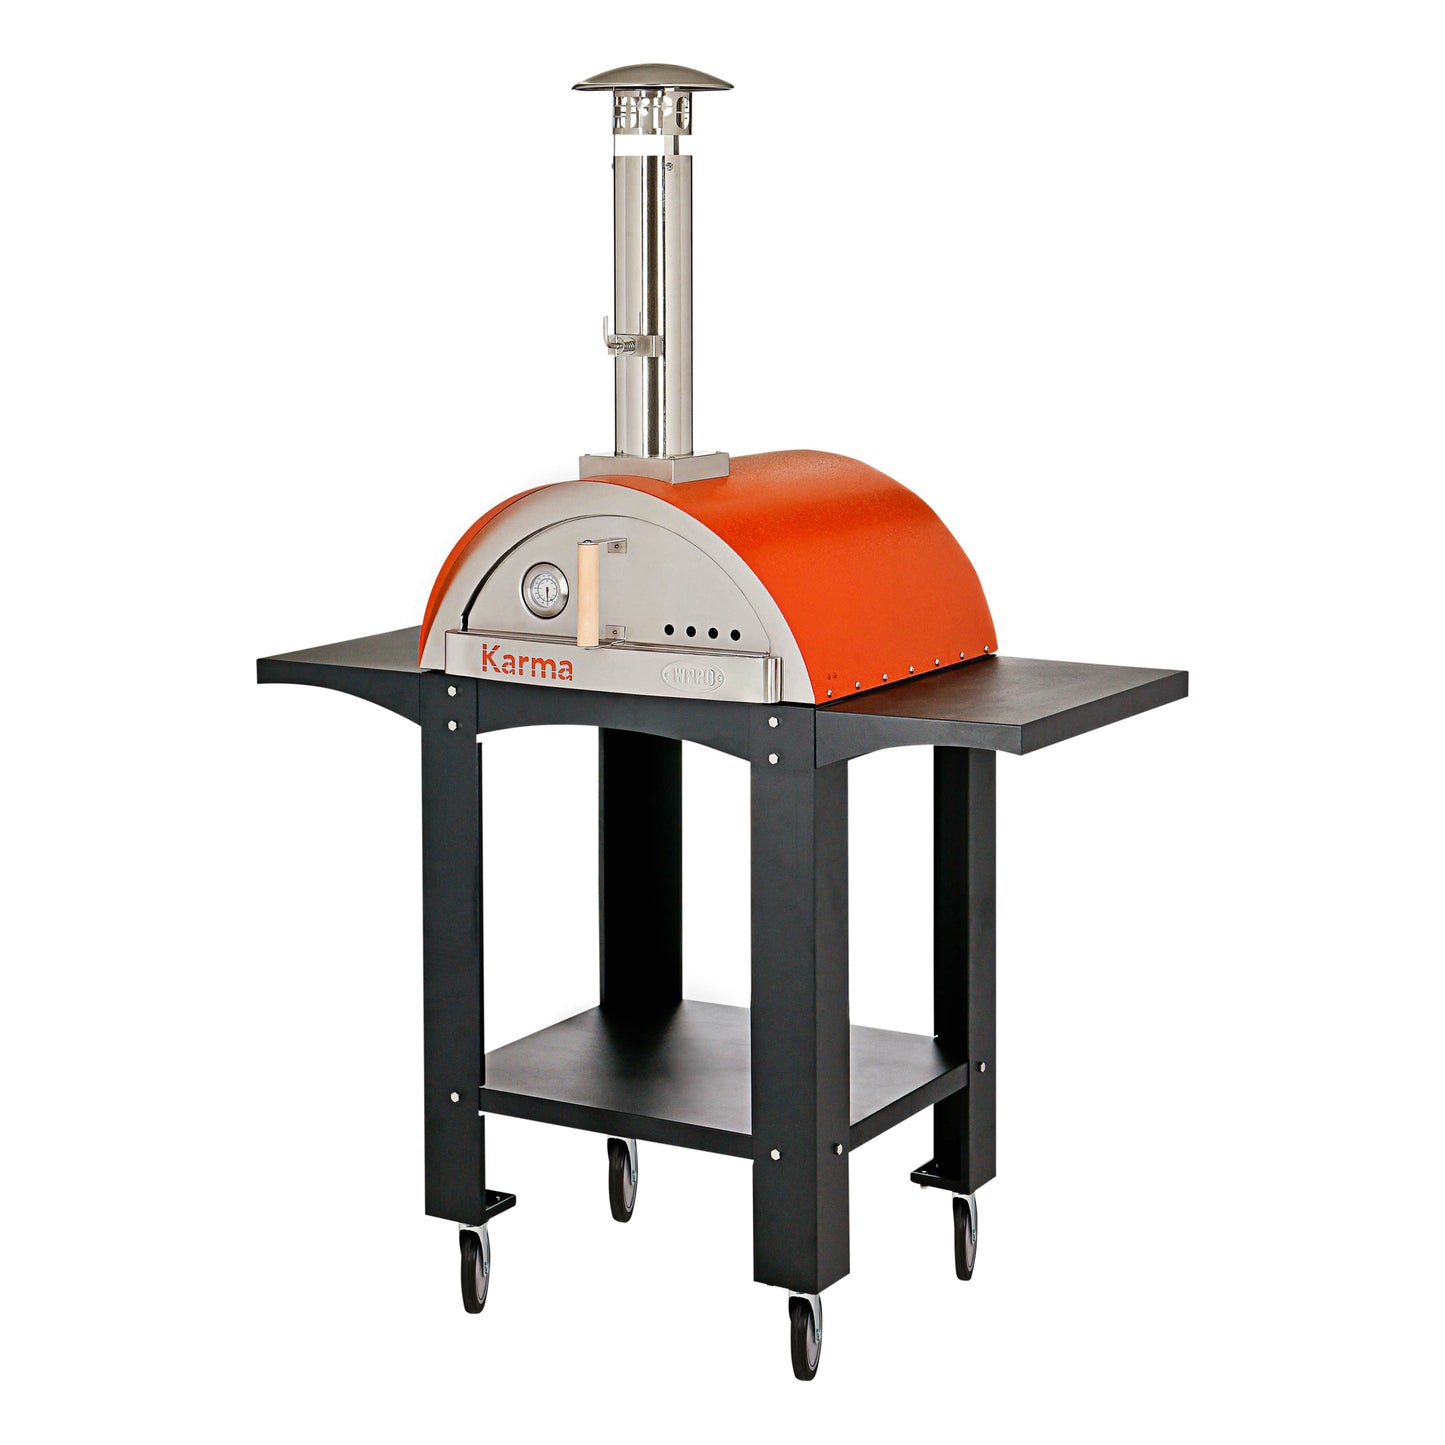 Karma 25 Pizza Oven With Black Stand - SAVE 30%